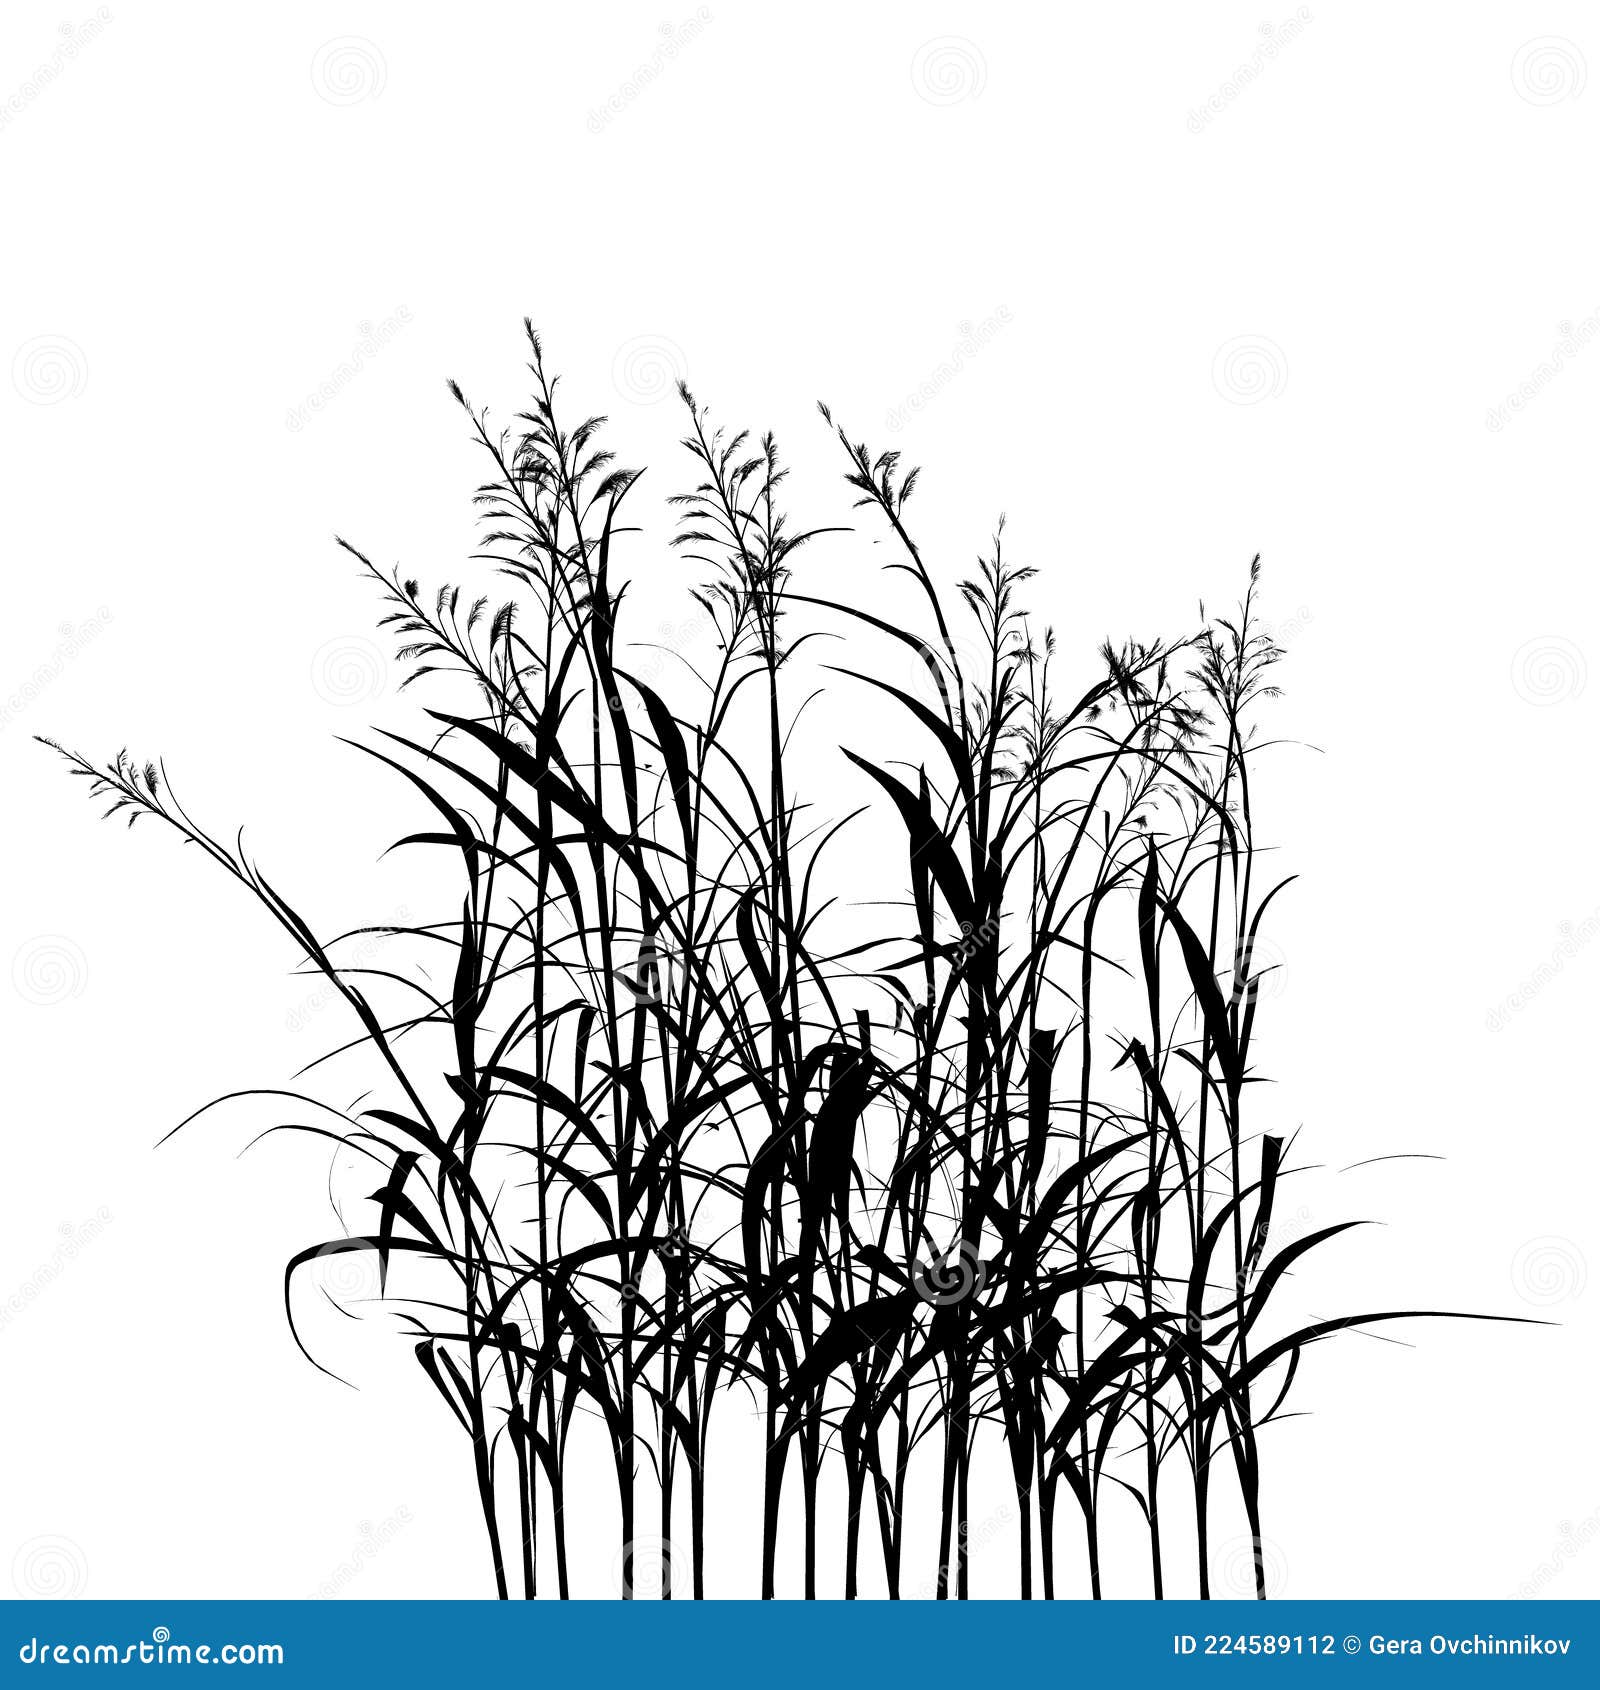 Grass Silhouette Isolated on White Background. Vector Illustration ...